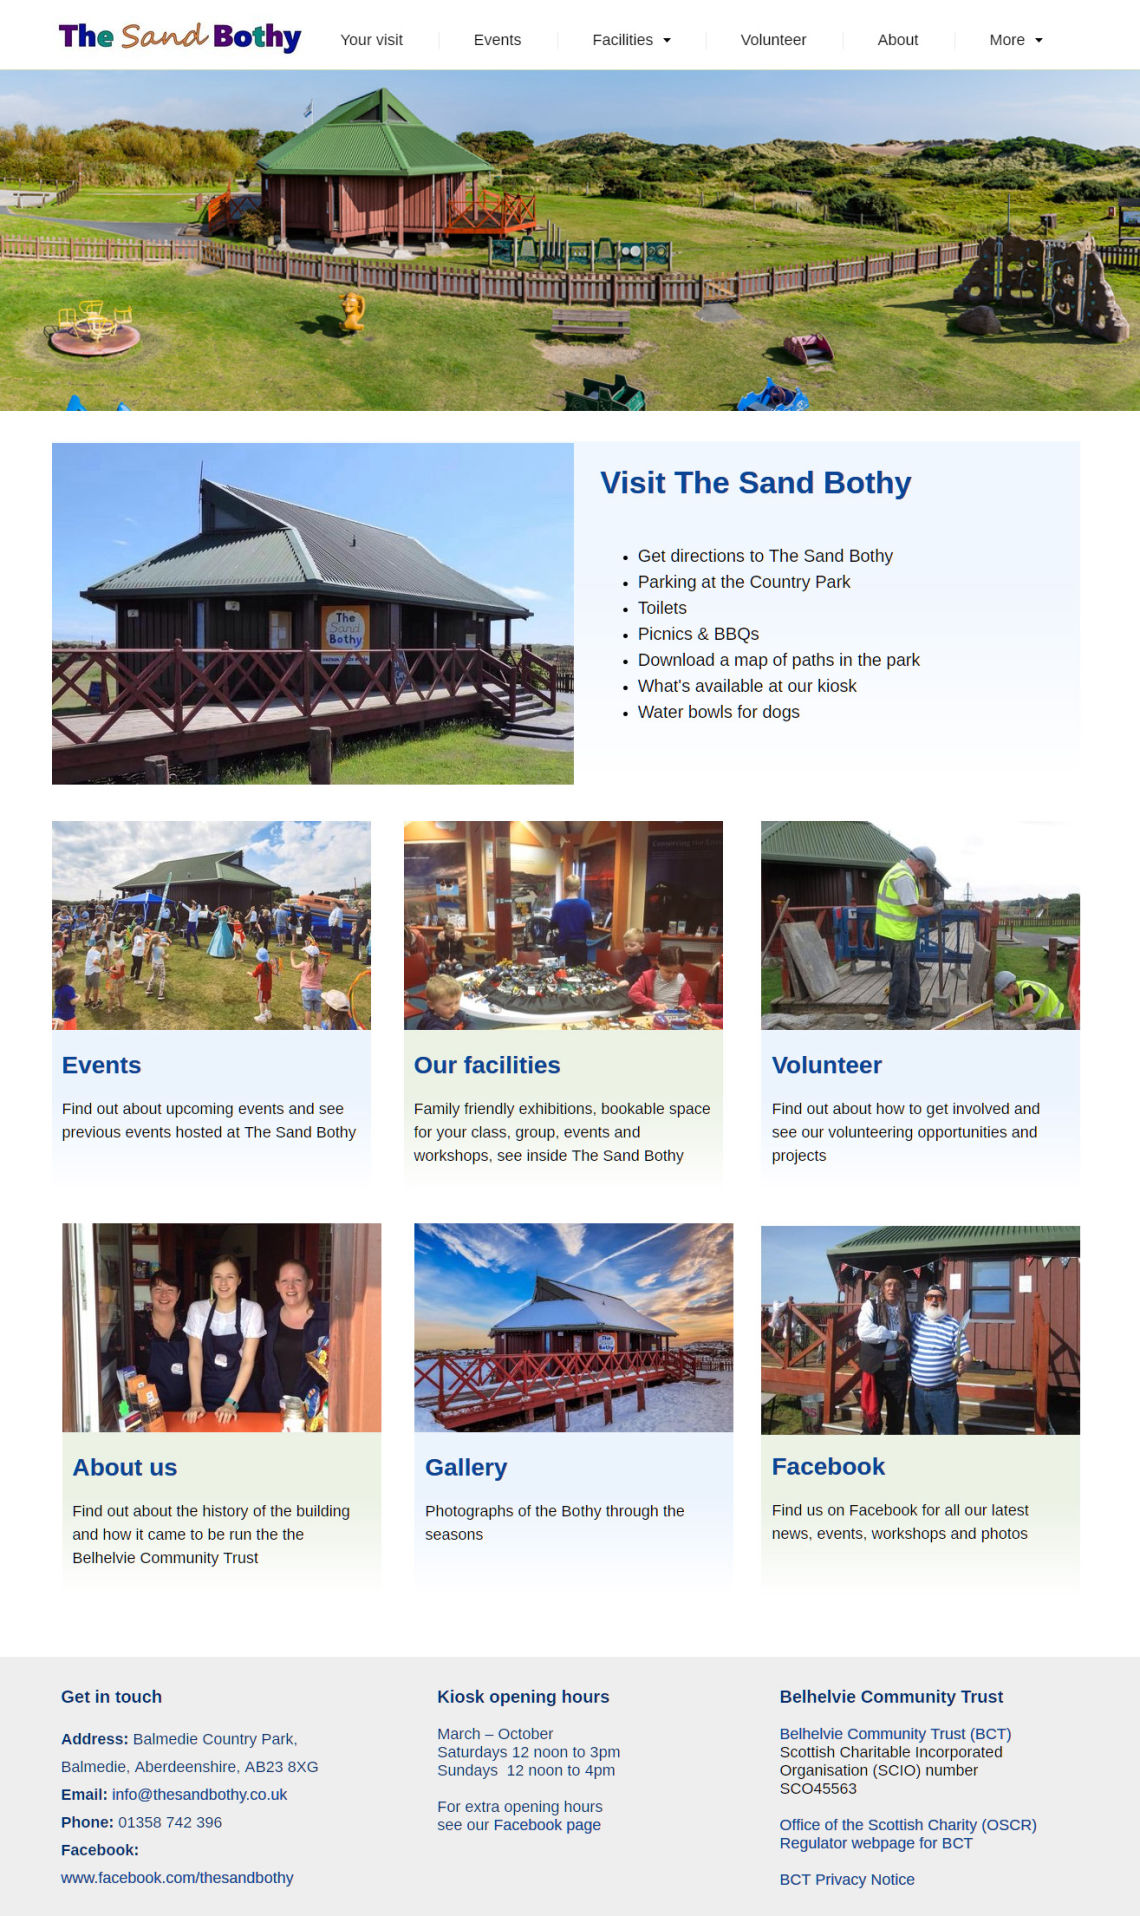 Homepage of The Sand Bothy website created by Doric Design